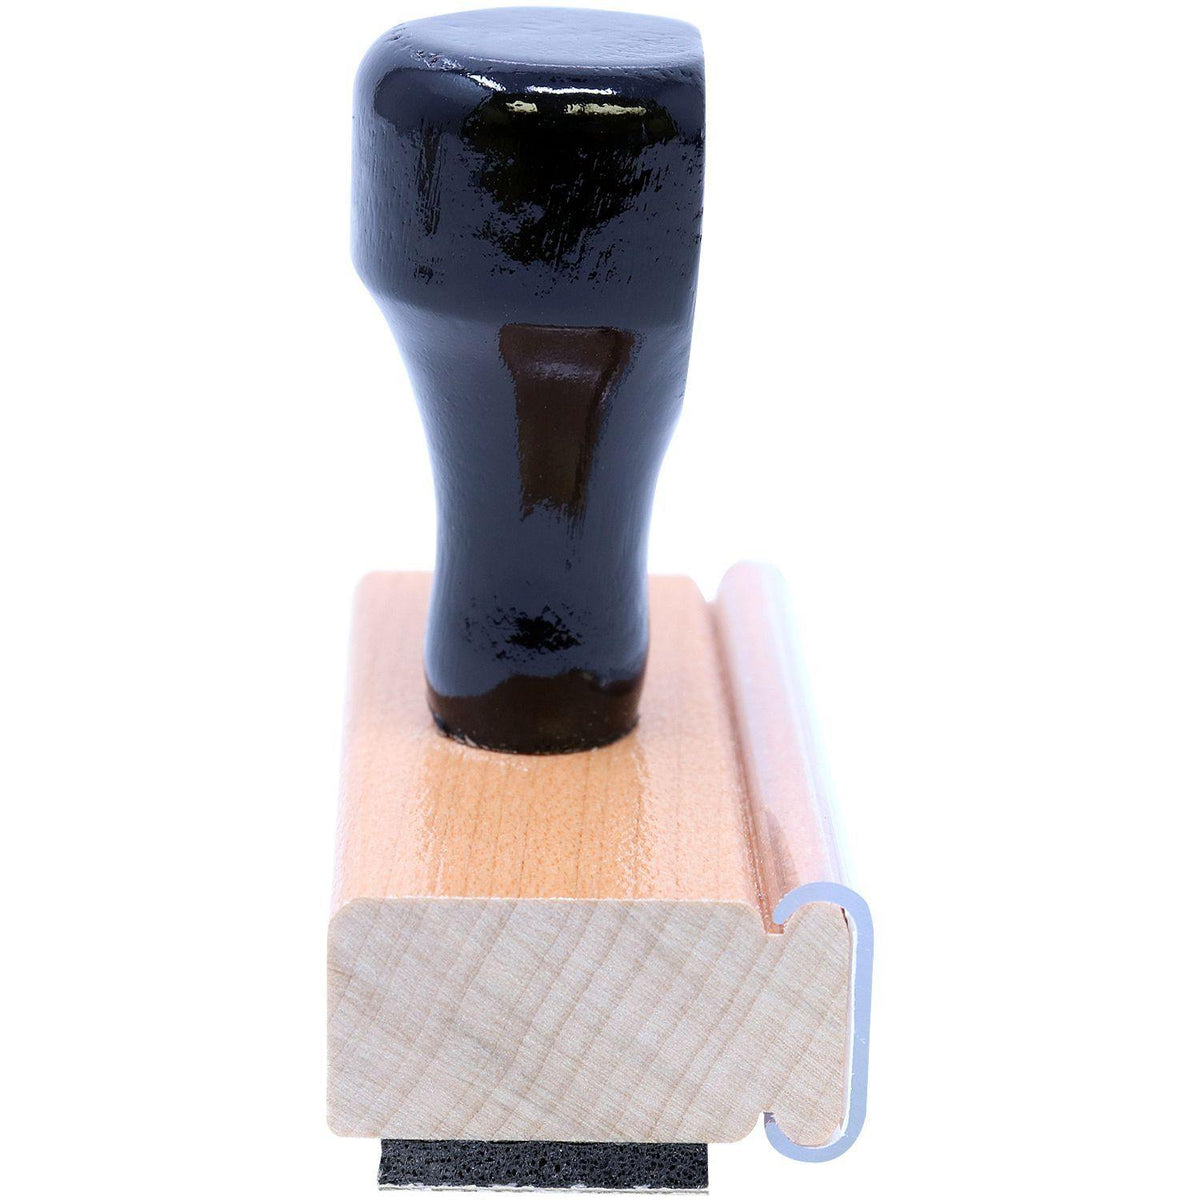 Non-Smoker Rubber Stamp - Engineer Seal Stamps - Brand_Acorn, Impression Size_Small, Stamp Type_Regular Stamp, Type of Use_Medical Office, Type of Use_Office